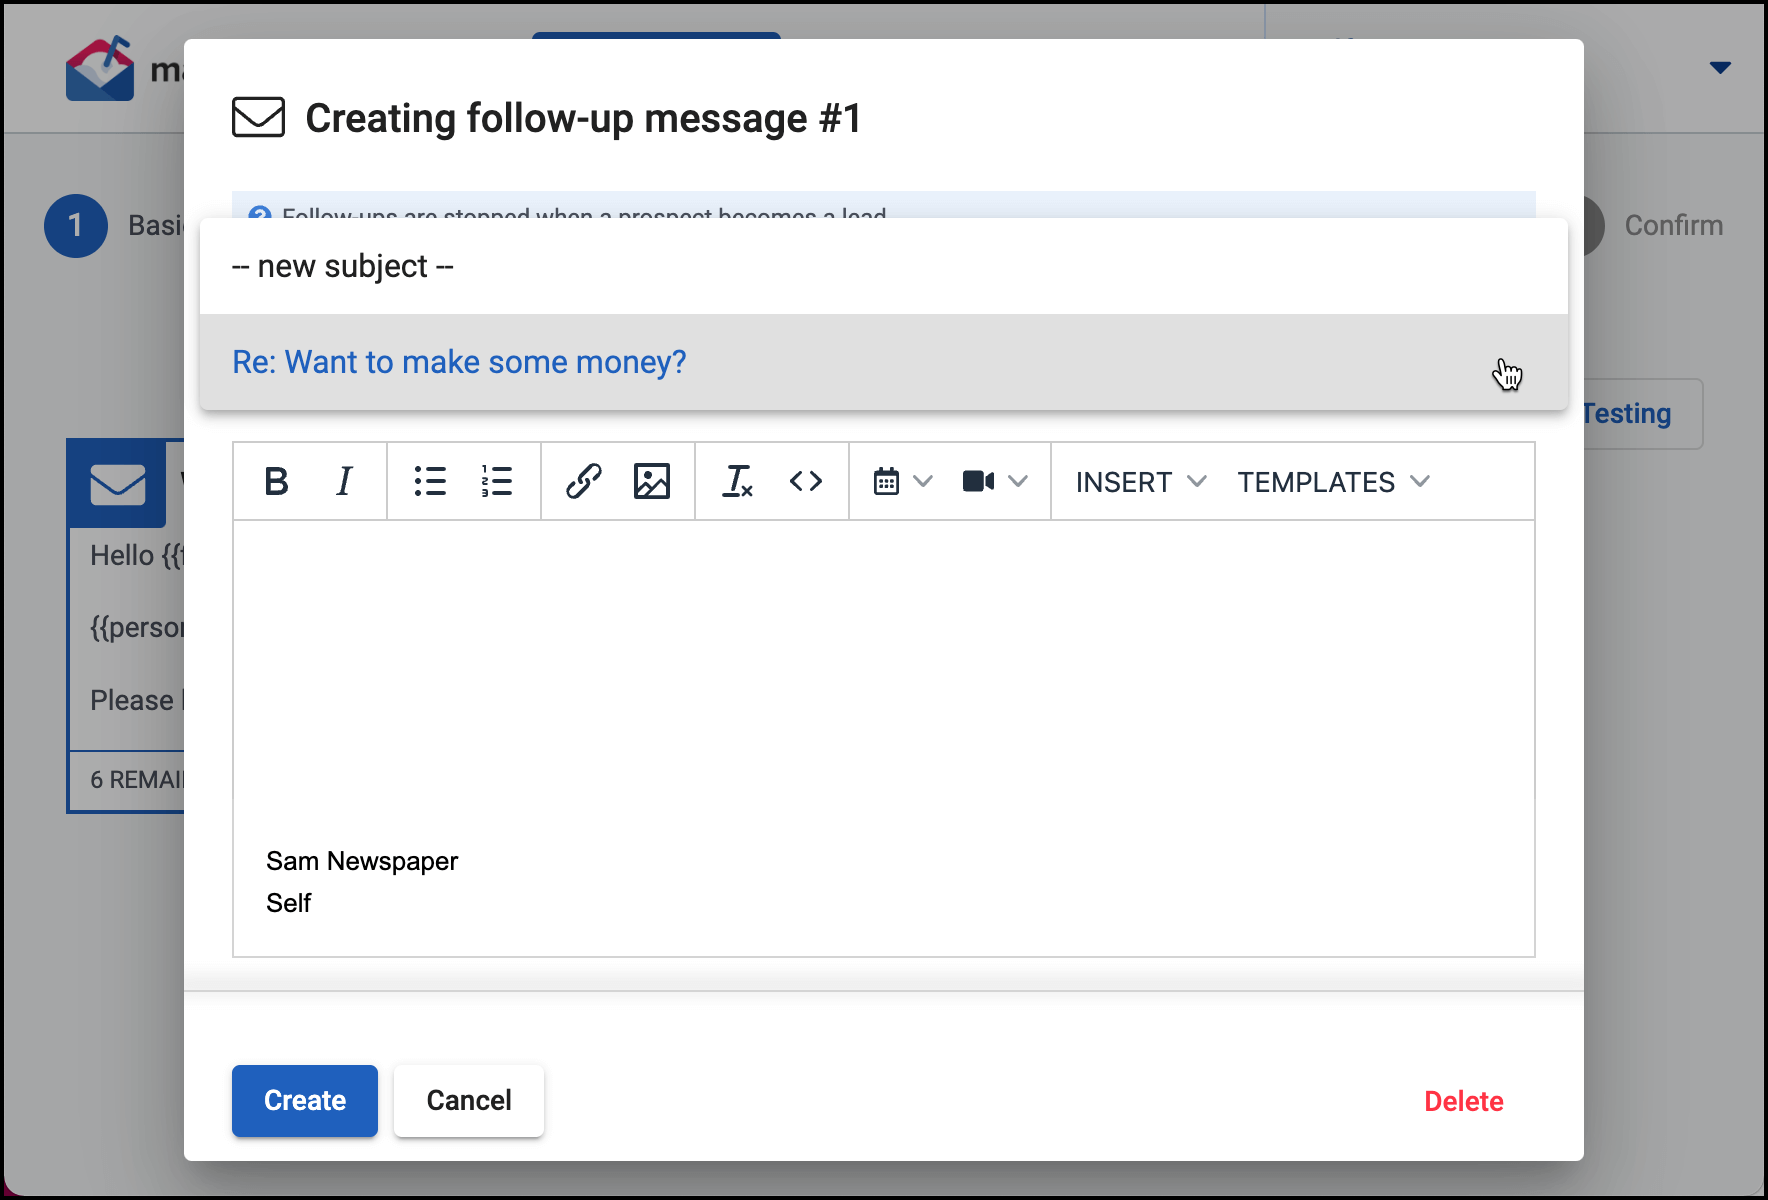 Mailshake's follow-up compose window